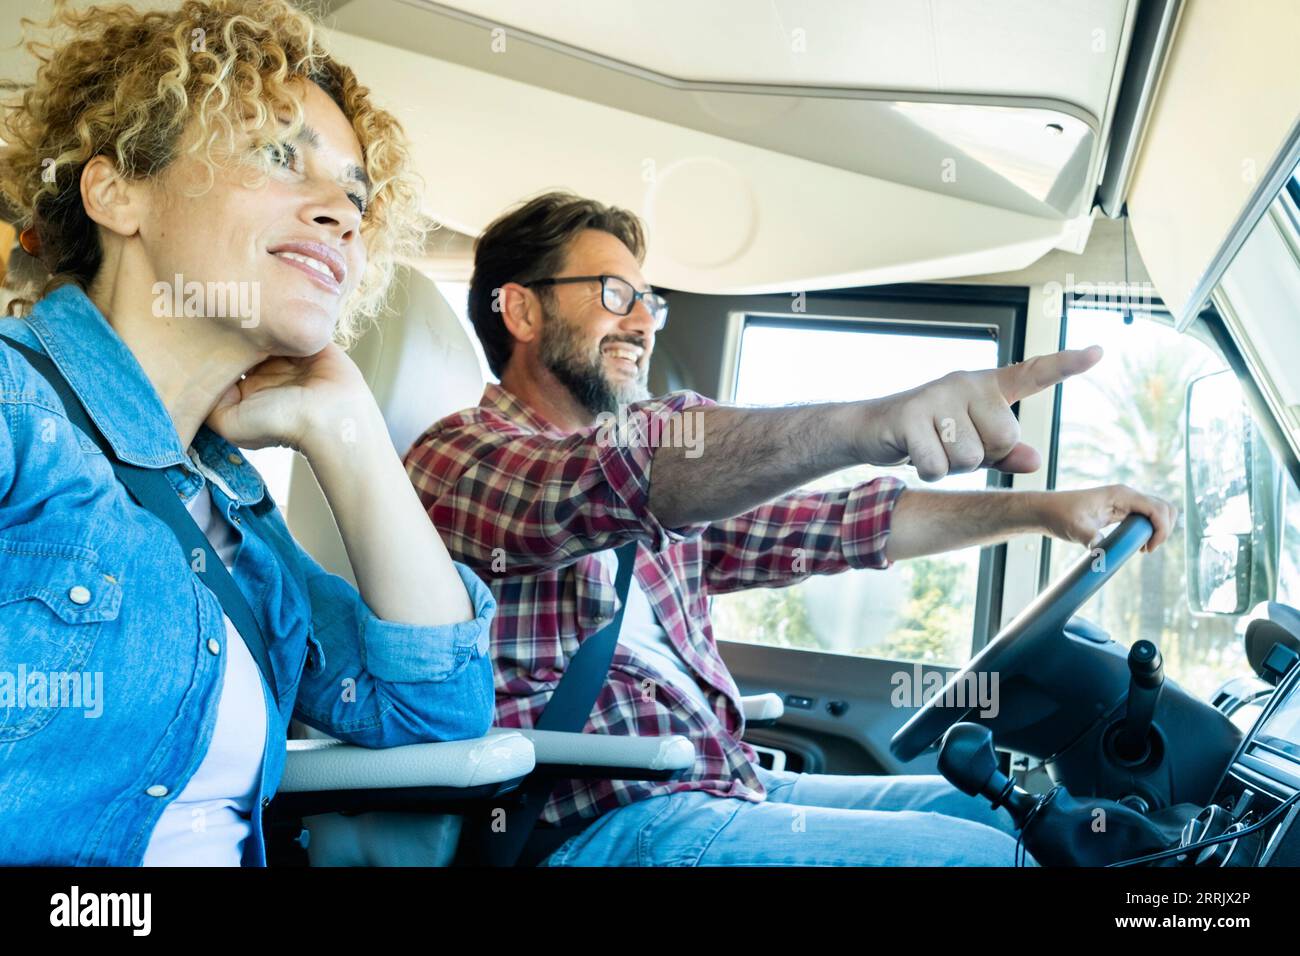 Happy couple of adult man and woman driving inside a camper van and enjoying alternative vehicle vacation together. Motorhome travel lifestyle and vacation on the road. People living adventure trip Stock Photo